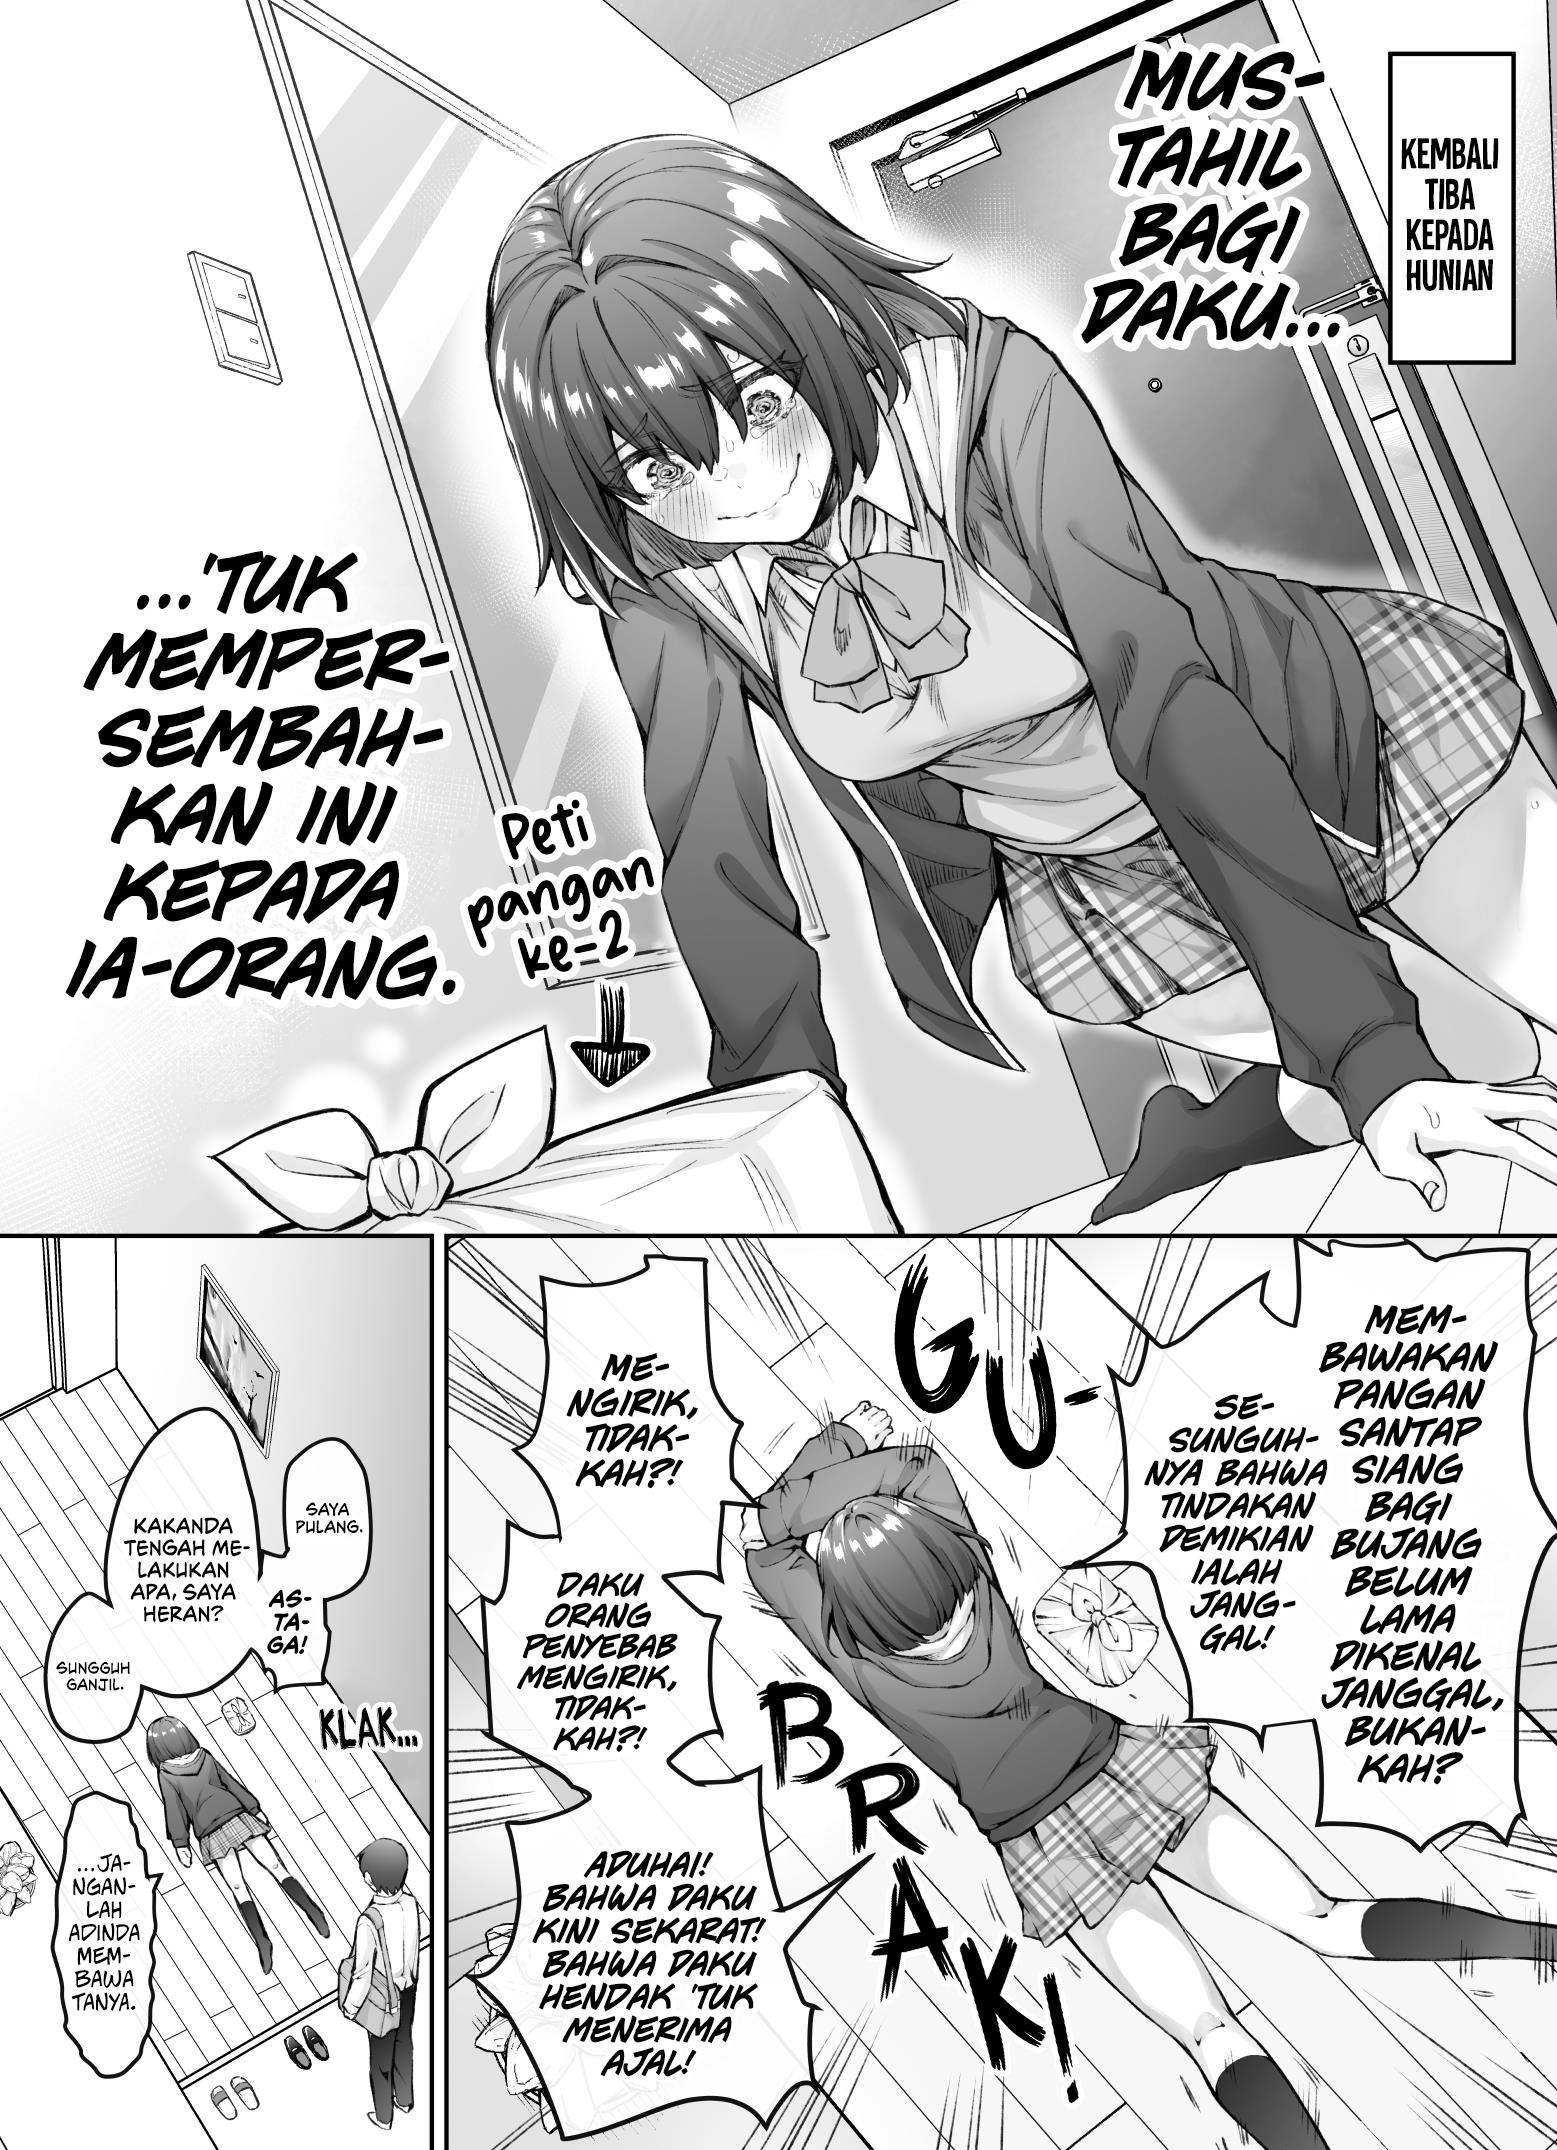 The Tsuntsuntsuntsuntsuntsun tsuntsuntsuntsuntsundere Girl Getting Less and Less Tsun Day by Day Chapter 17.1